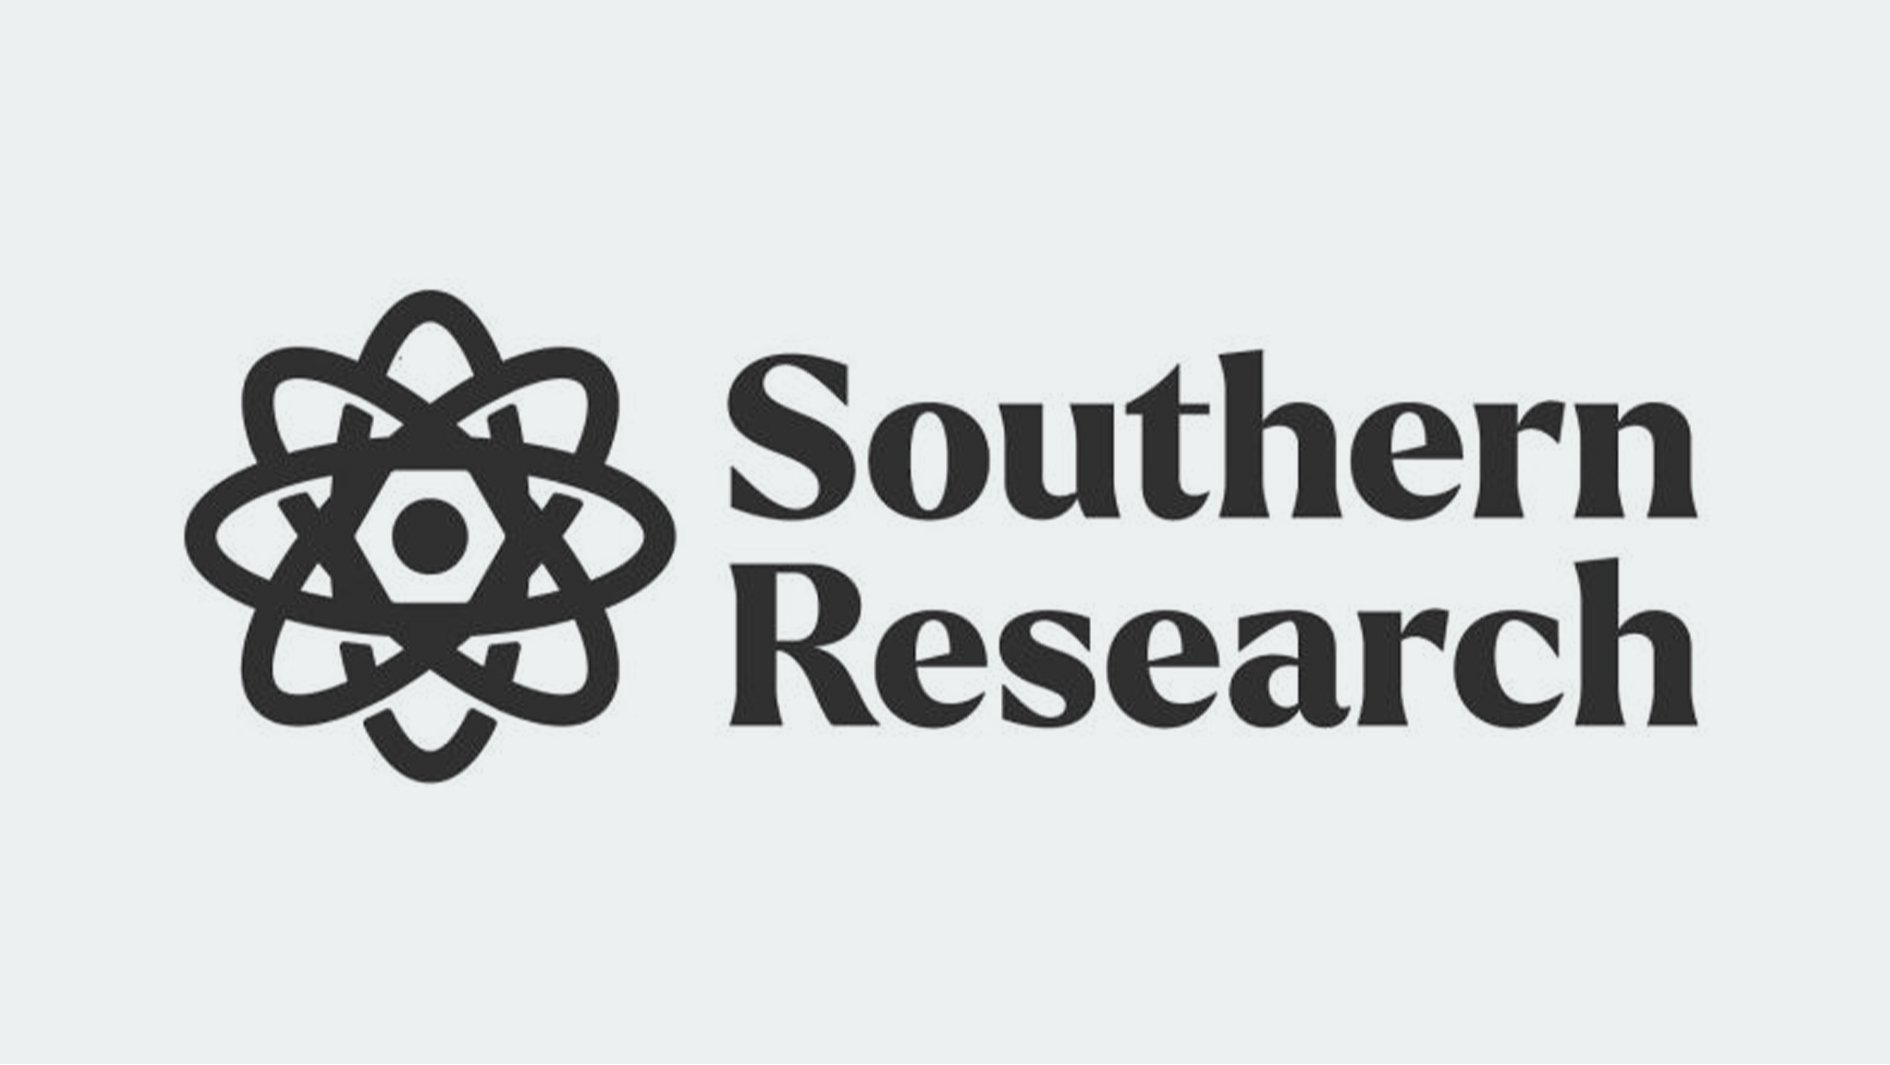 Clients-Logos-SouthernResearch.jpg